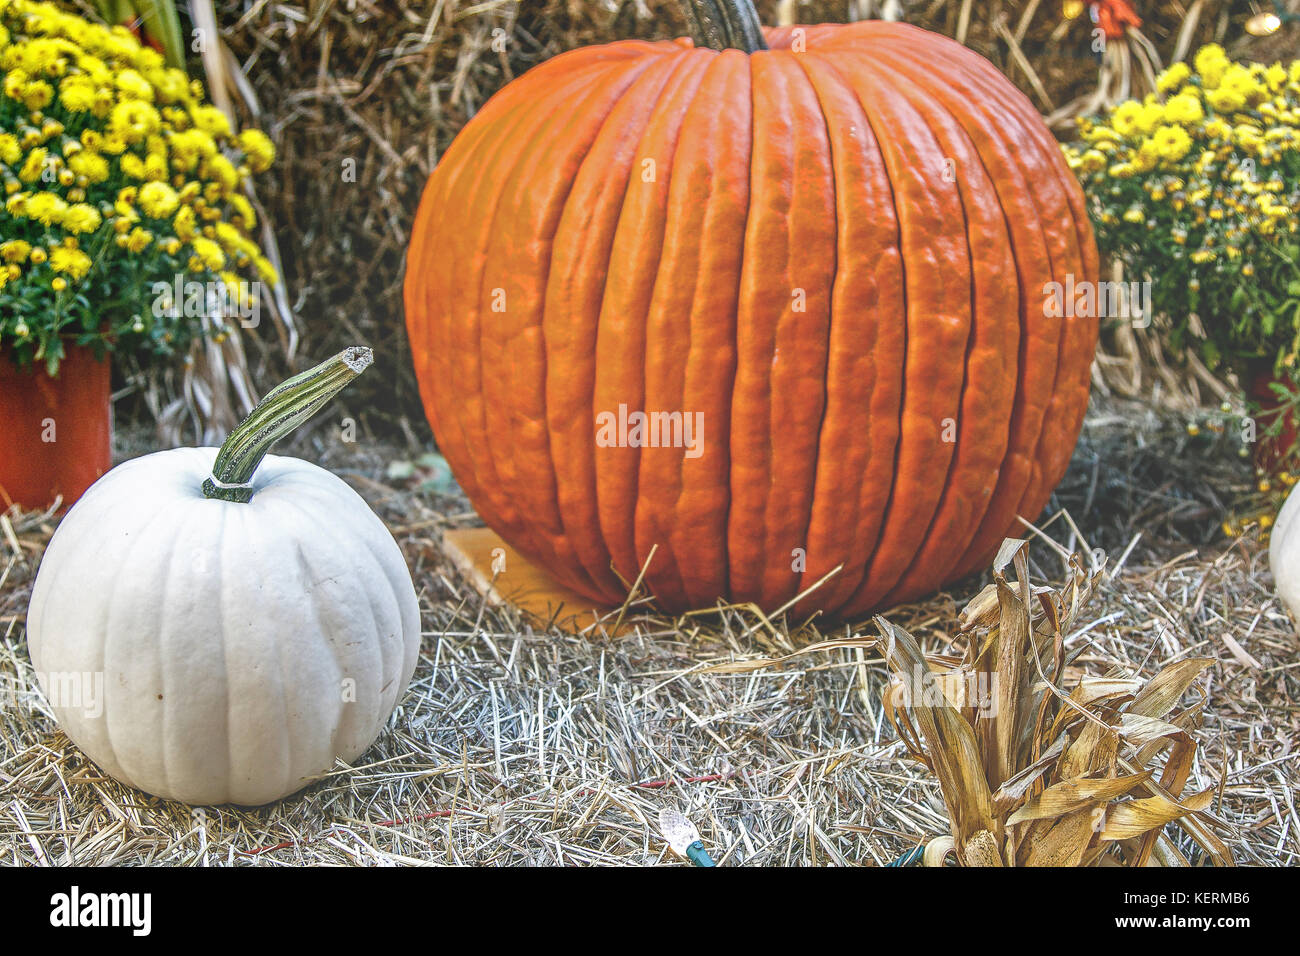 Halloween decoration with pumpkins, hay and yellow flowers. Stock Photo